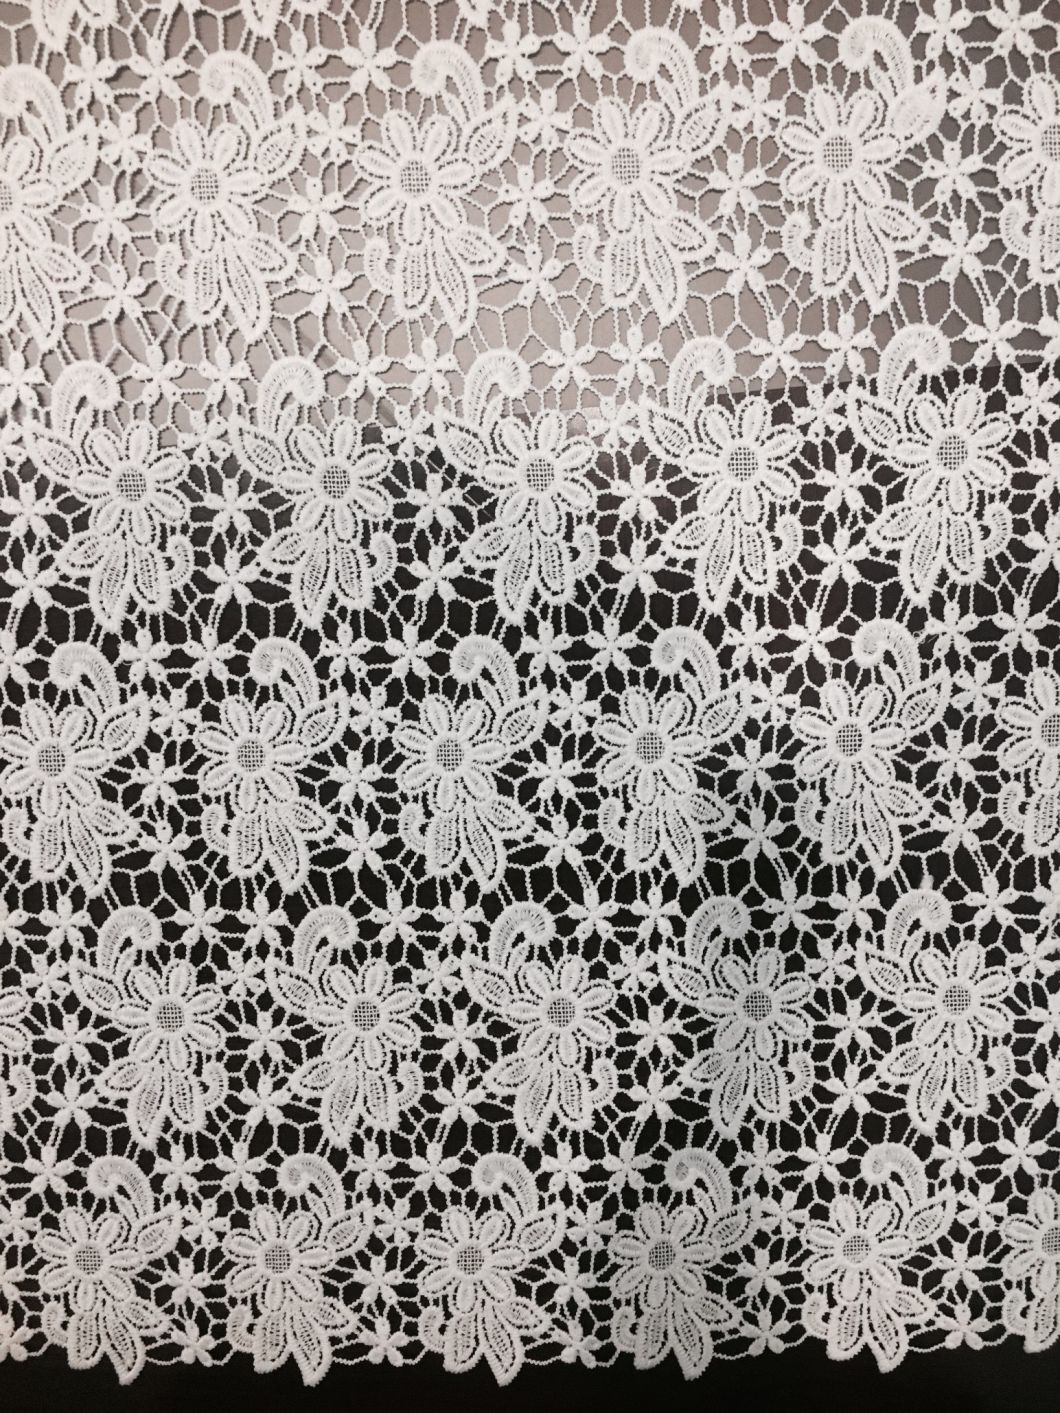 Organza Lace Chemical Lace Embroidery Fabric, Embroidery Design Fabric, Wedding Dress, Fancy Lace